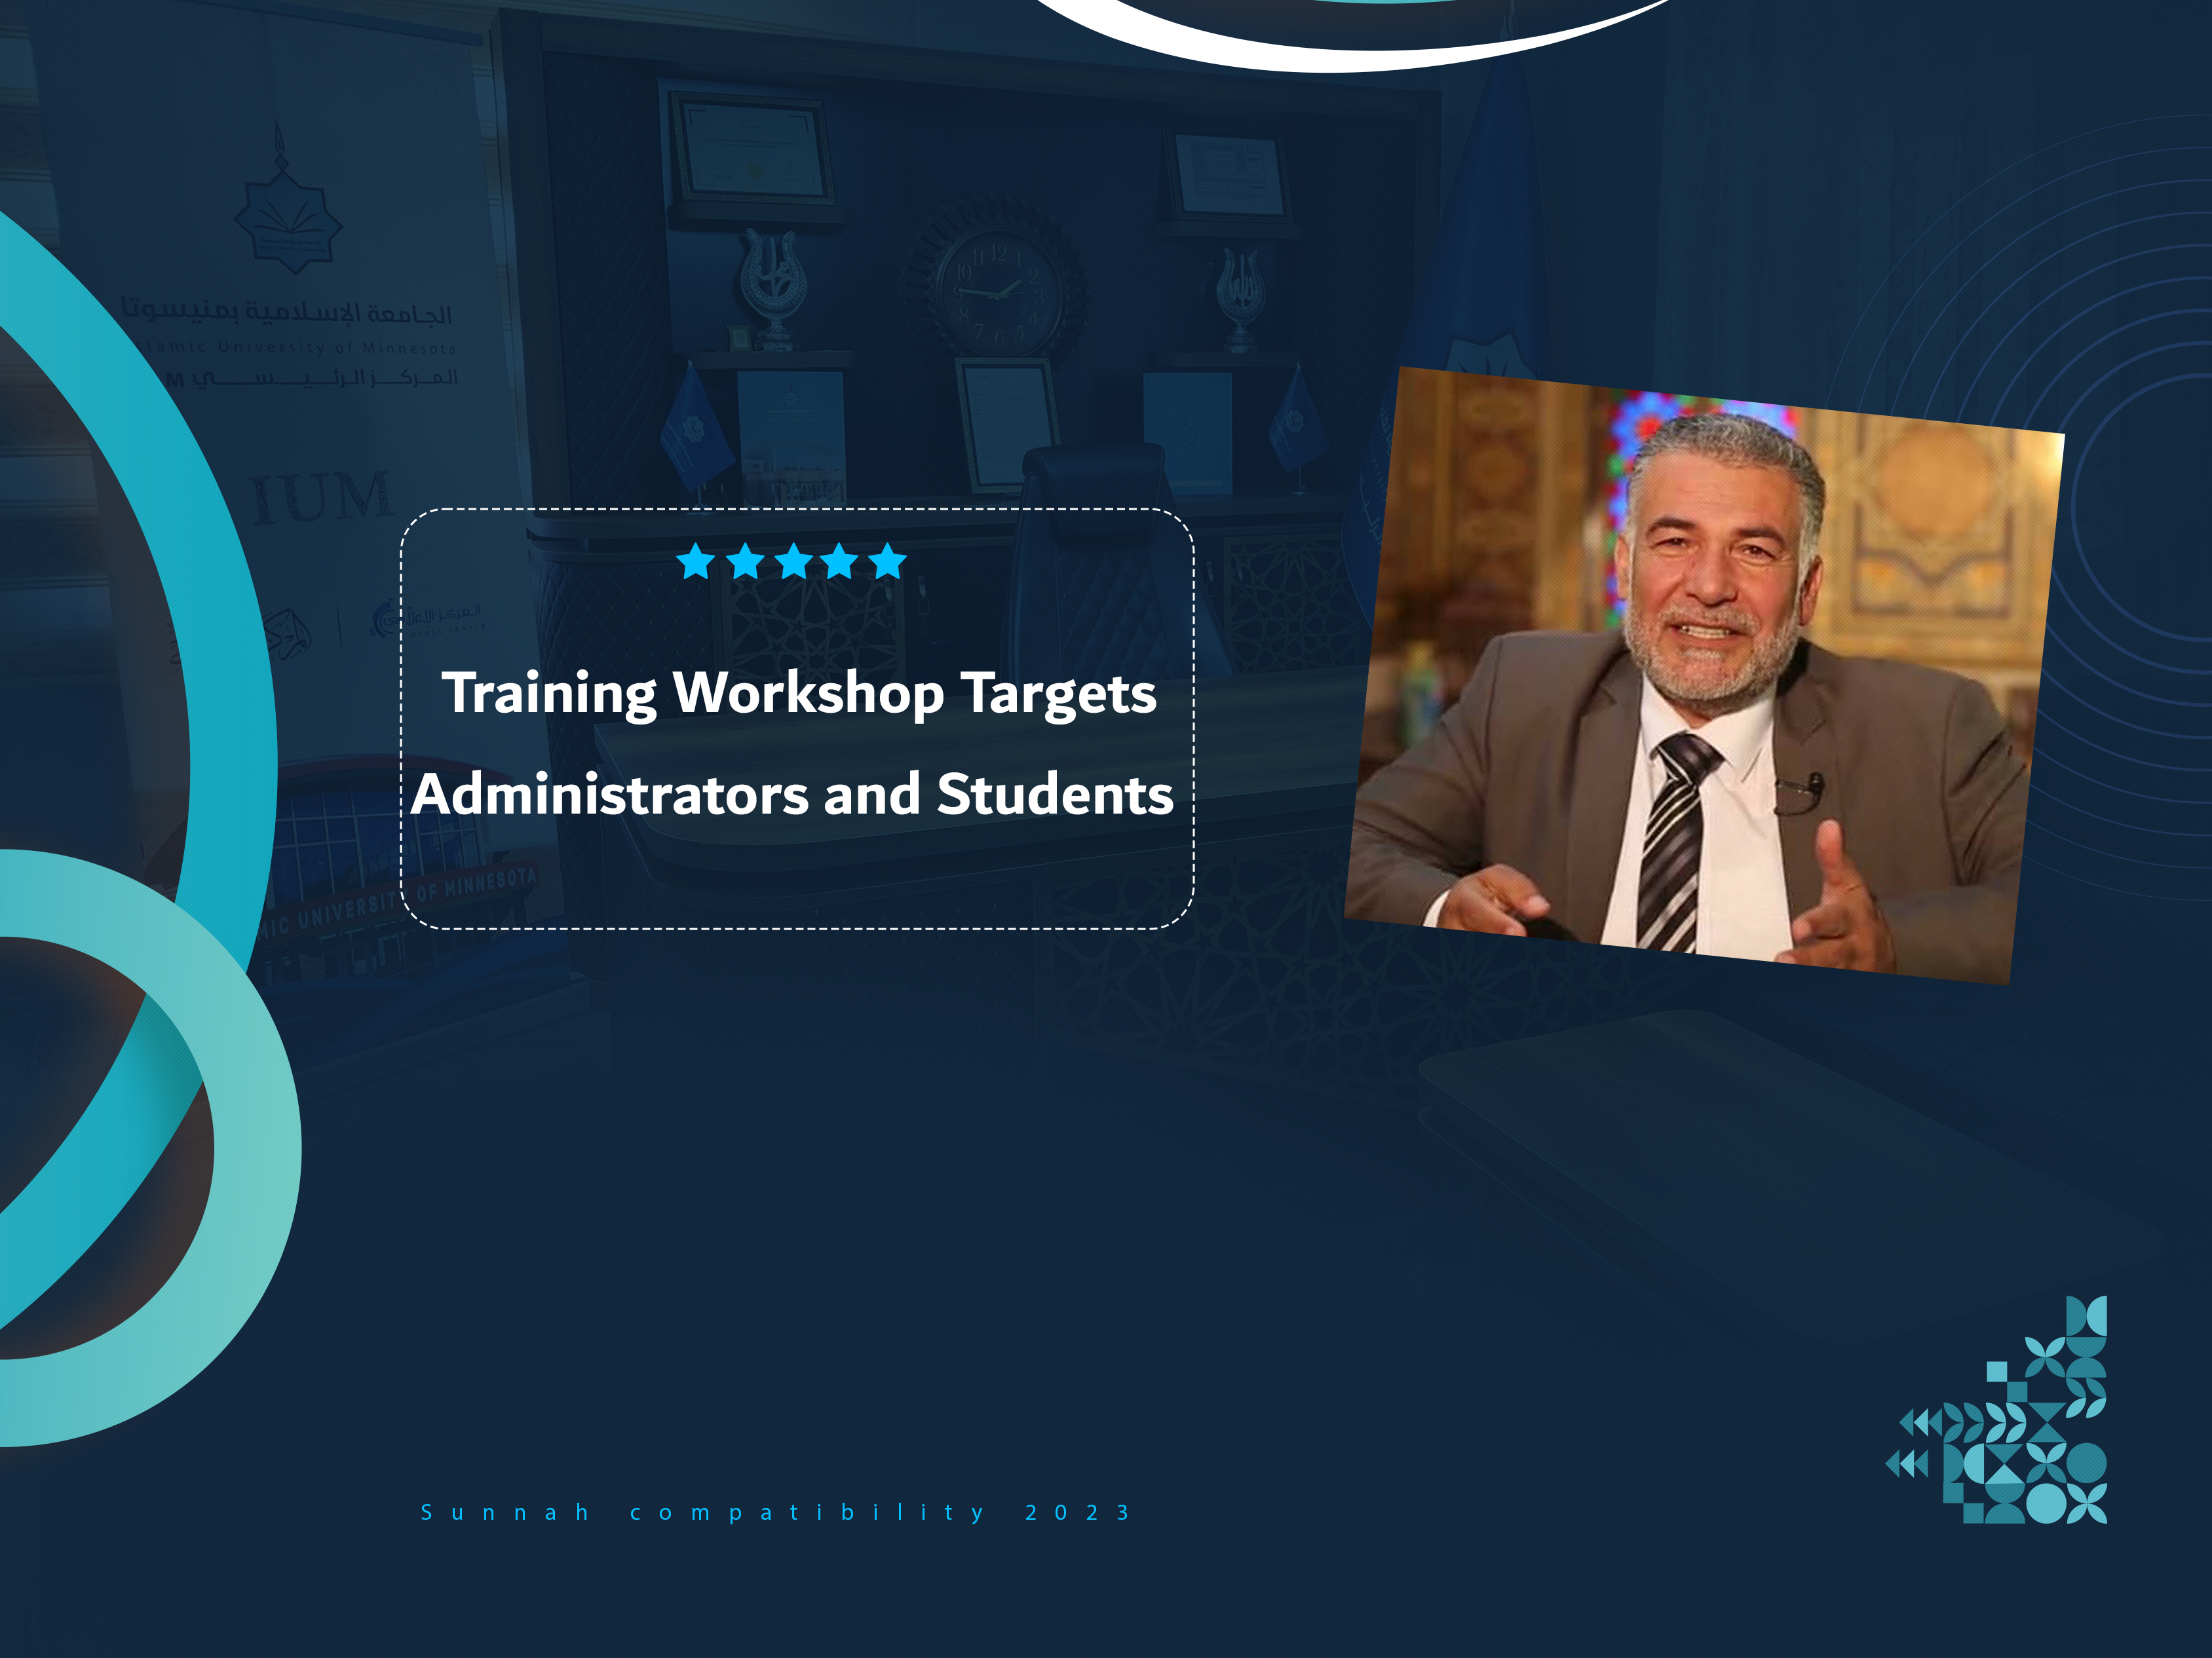 Training Workshop Targets Administrators and Students